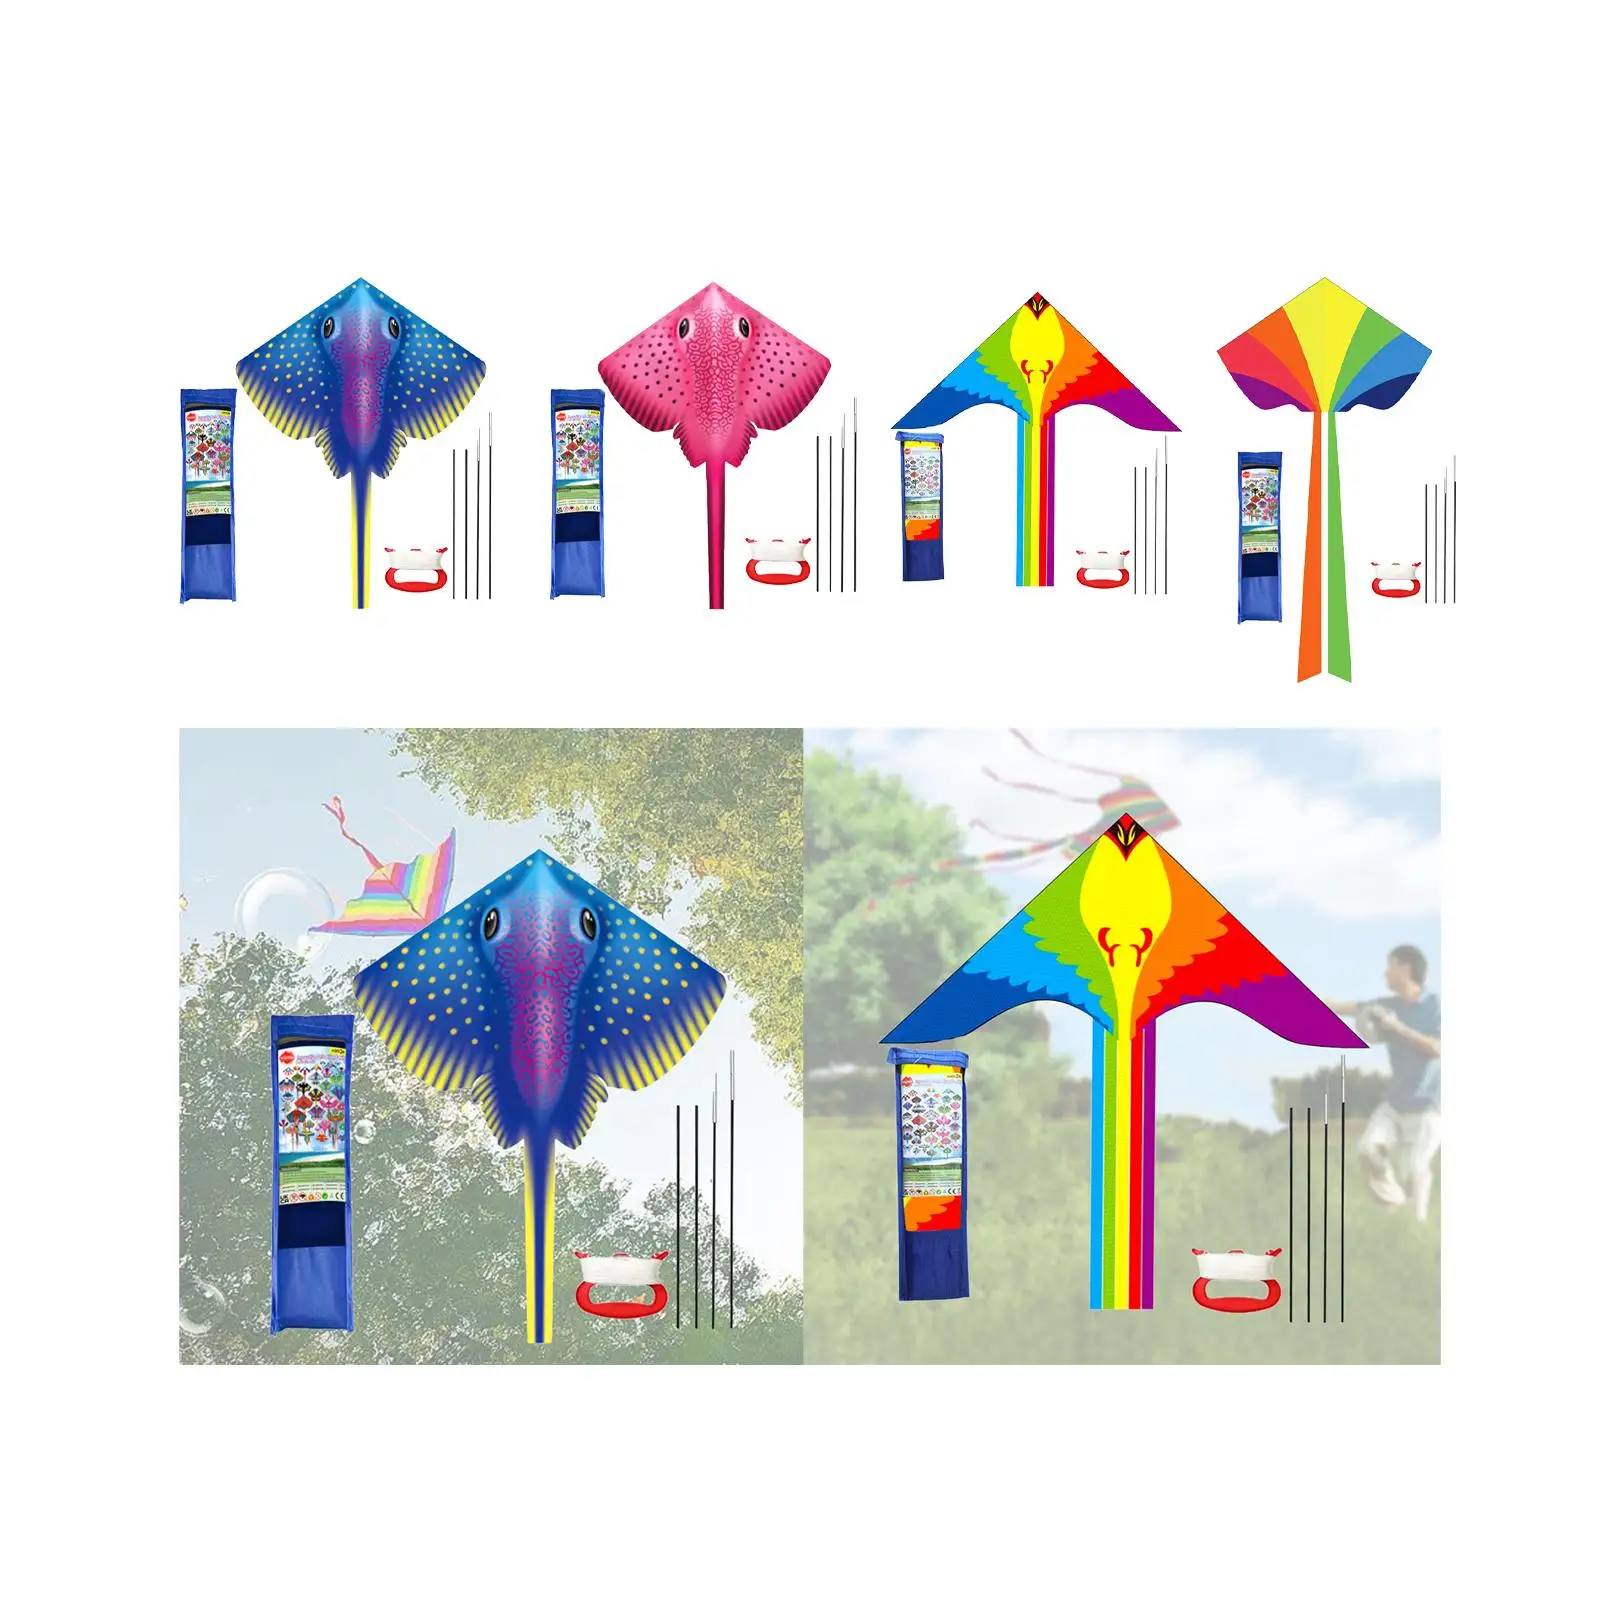 Huge Kite Easy to Fly Stable Outdoor Fly Kite Game for Beach Festival Travel